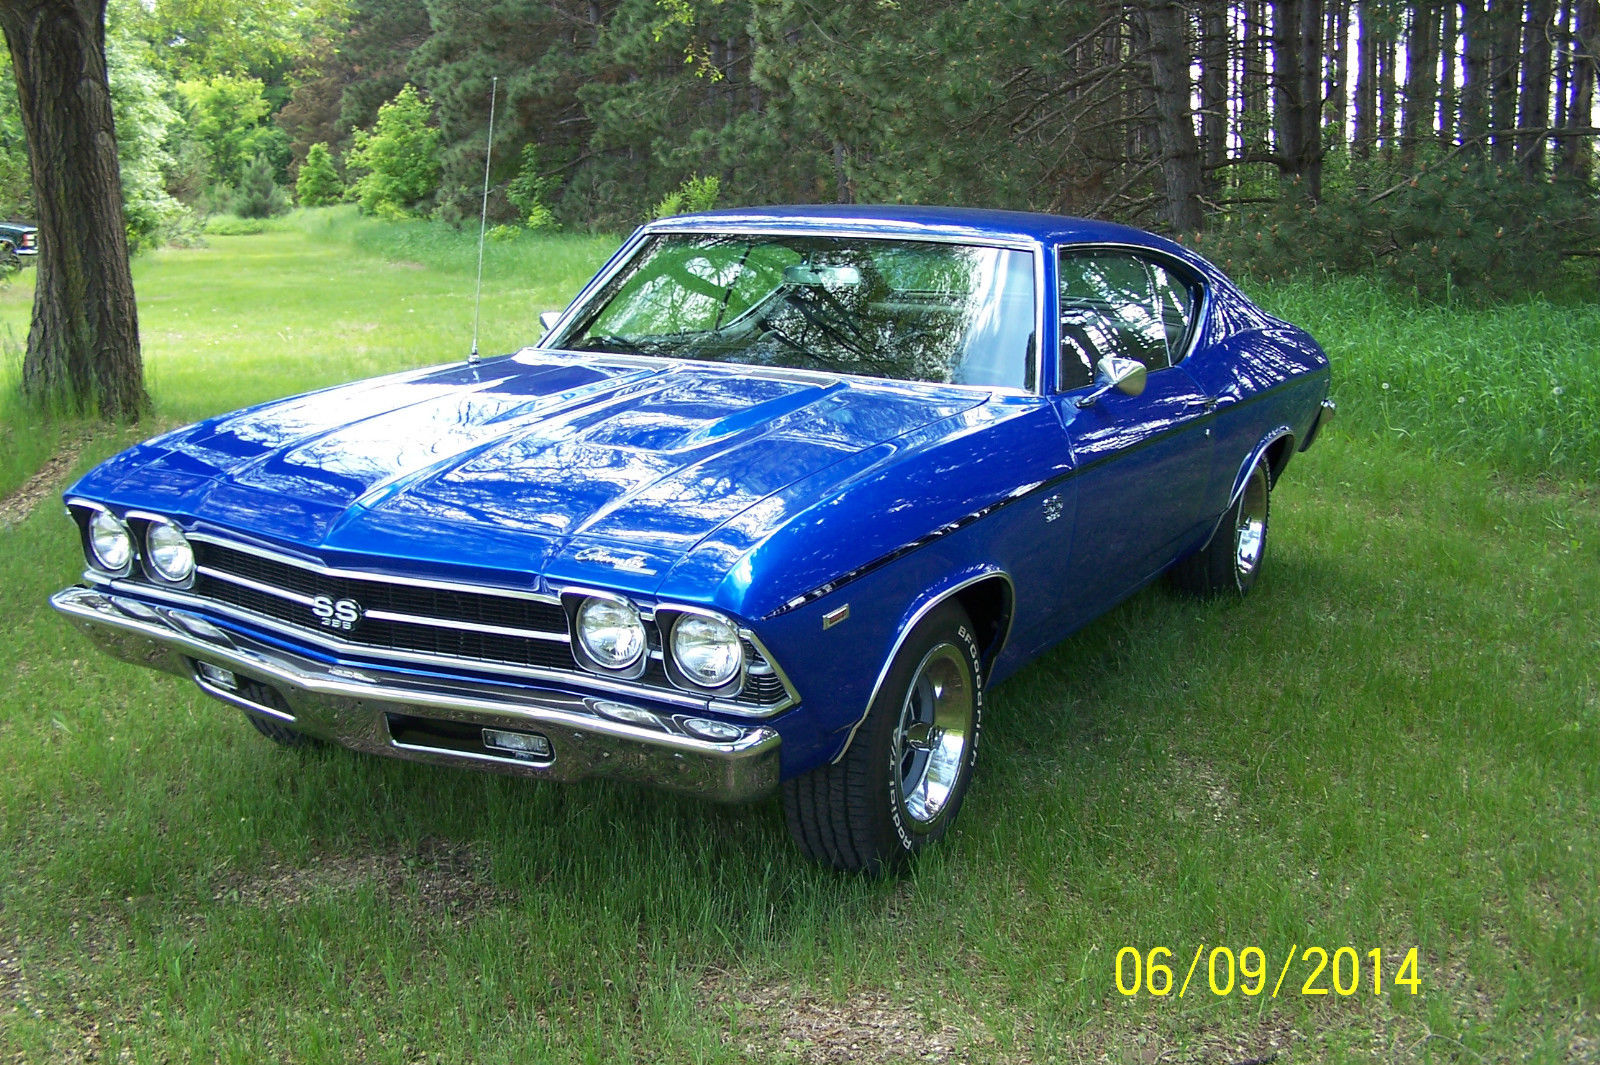  Chevrolet Chevelle Ss Pictures